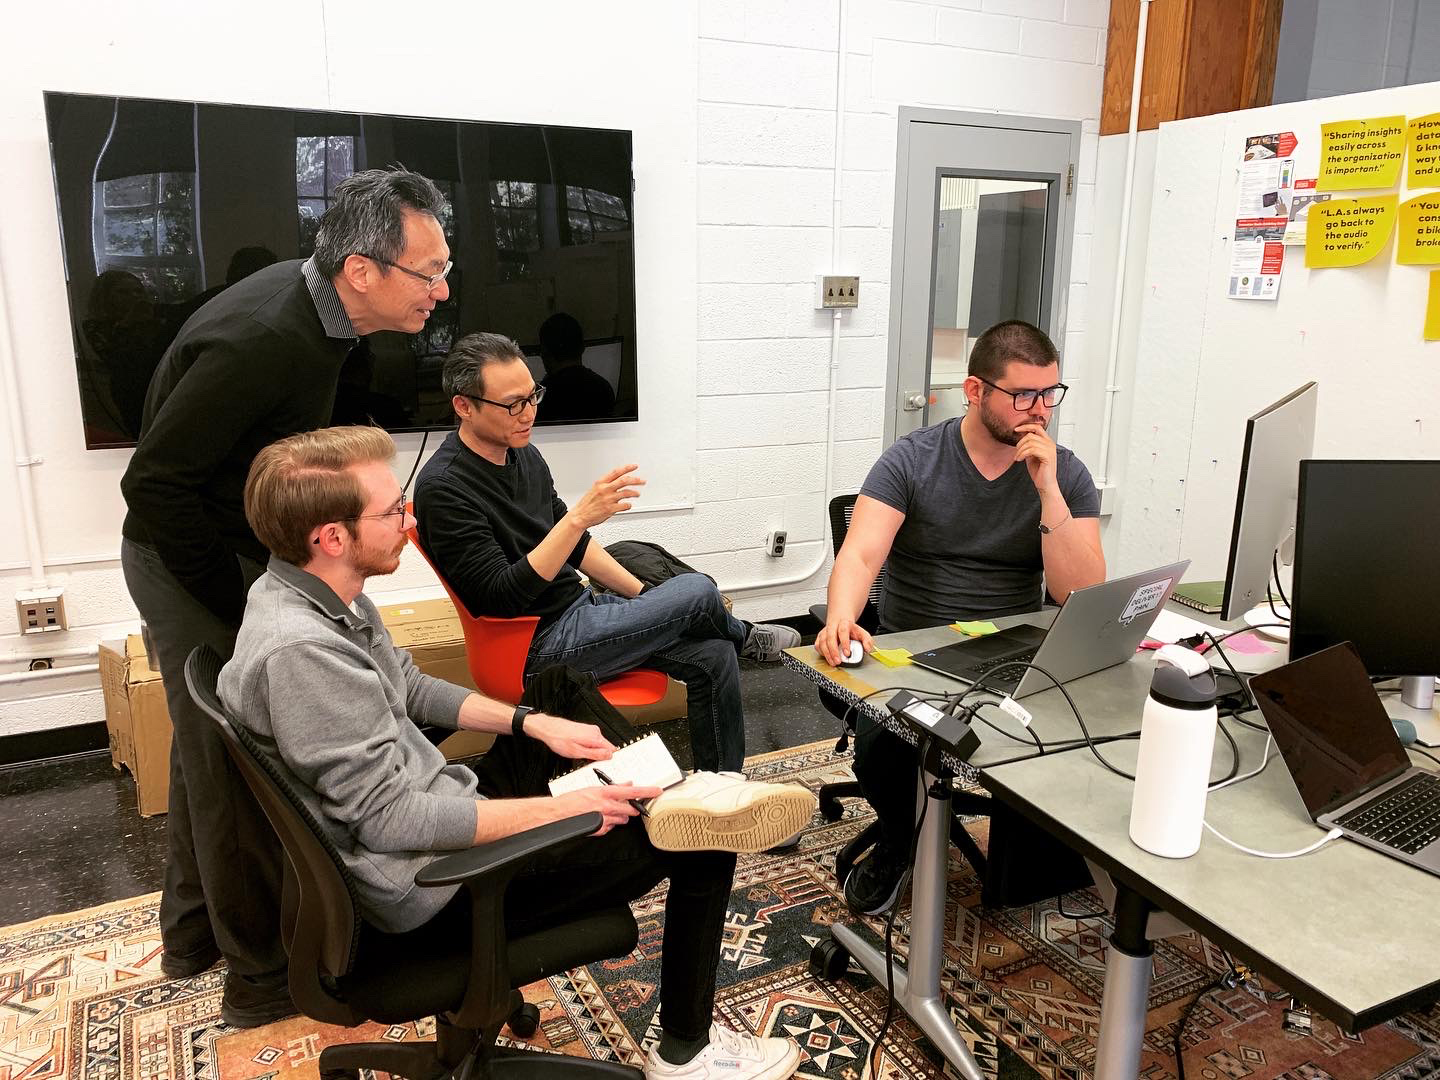 4 men sitting in a studio space discussing interactive work on a screen